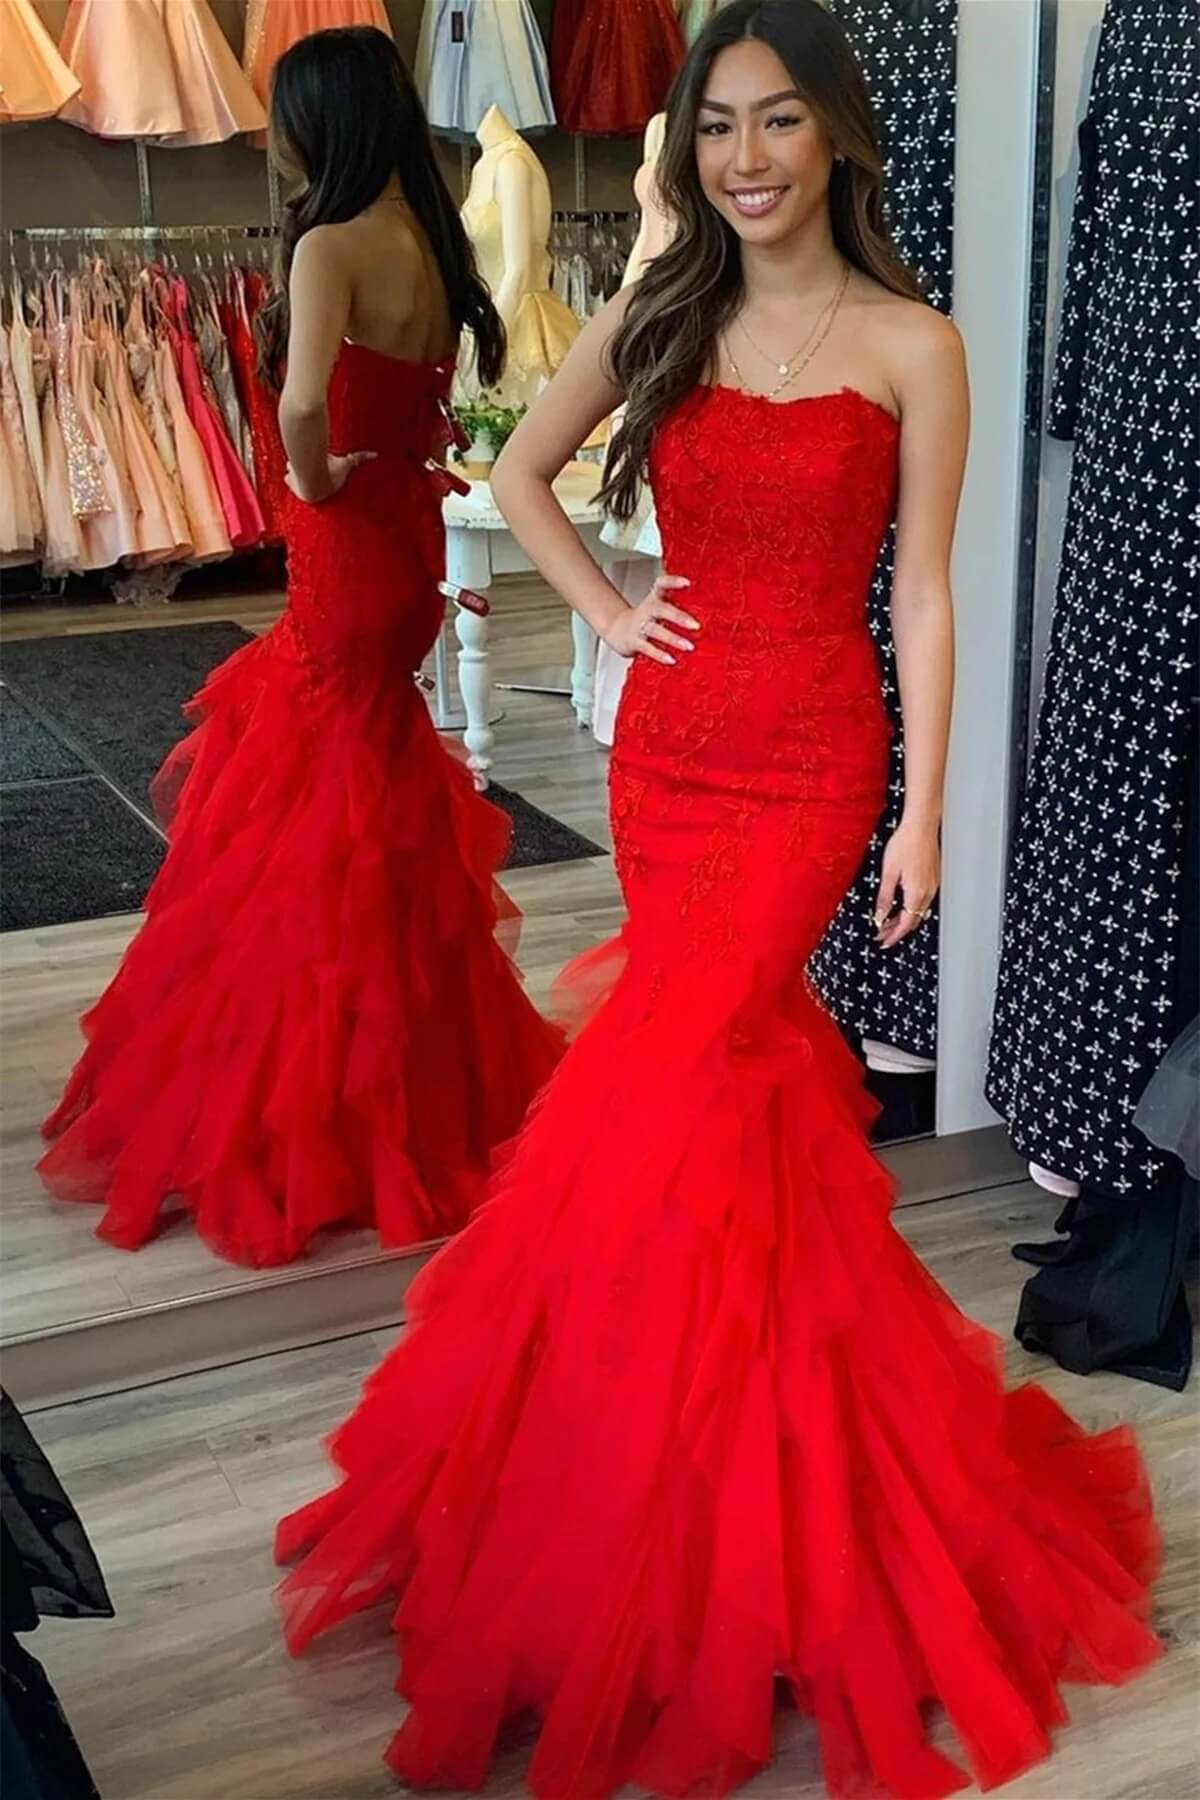 Ruffle Red Lace Prom Dresses Mermaid Tulle Long Formal Evening Dress SH827